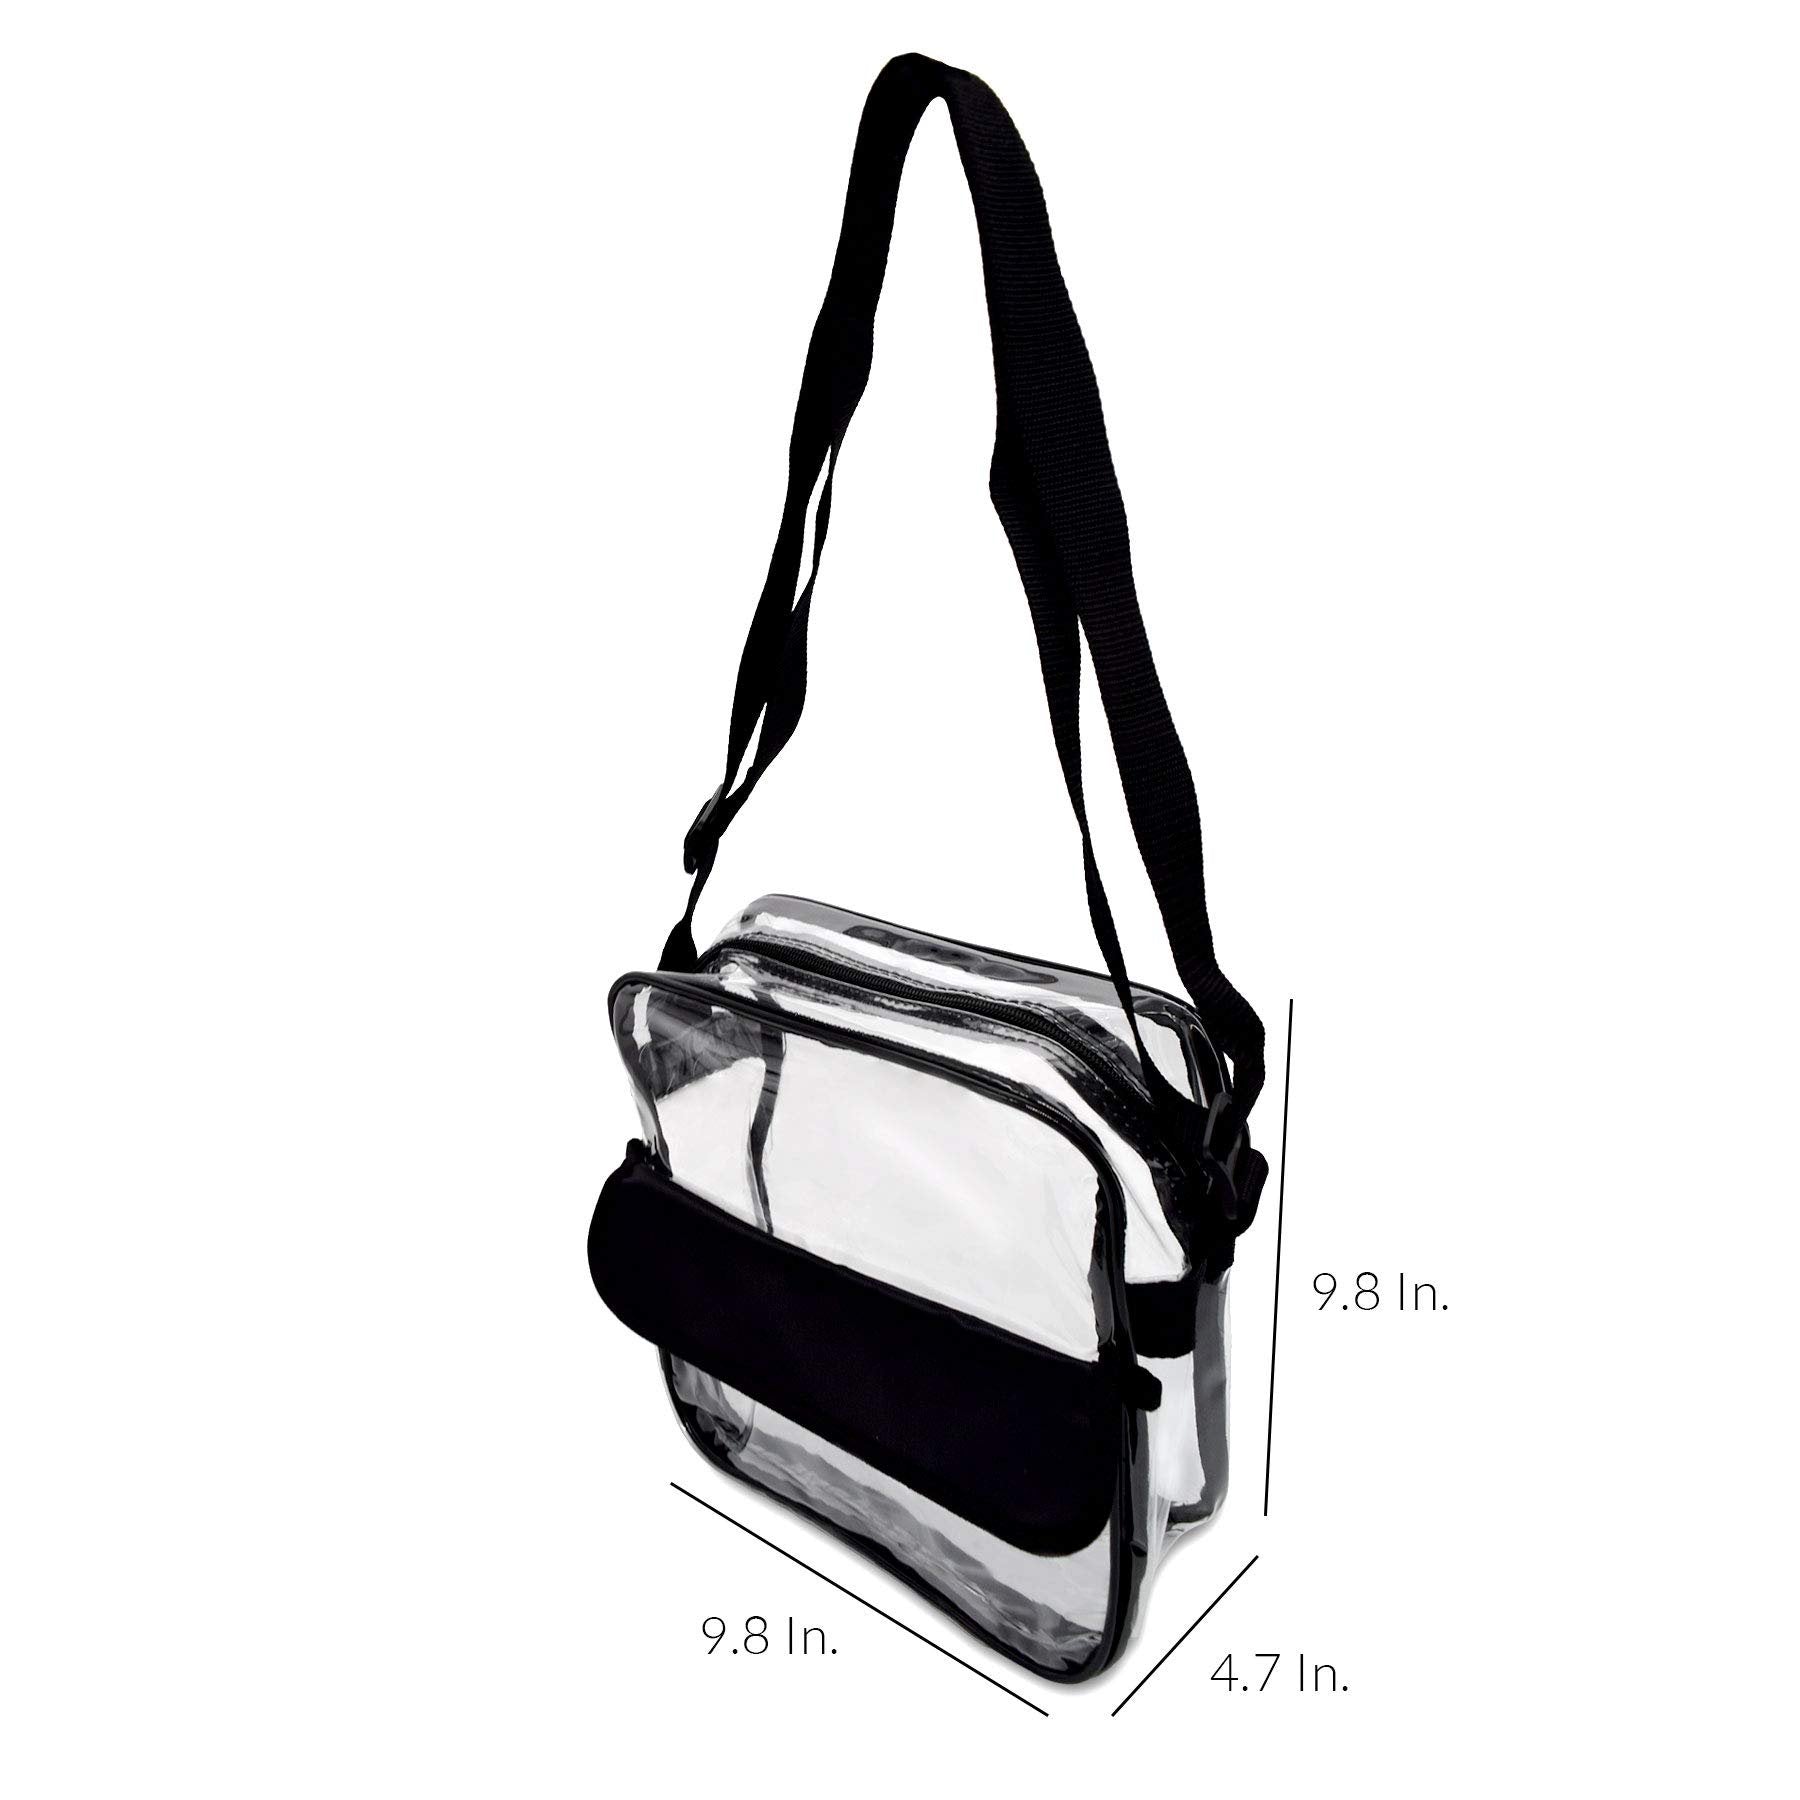 Black Clear Stadium Approved Crossbody Purse, Adjustable Strap, Front Pocket, 10x10x4.5